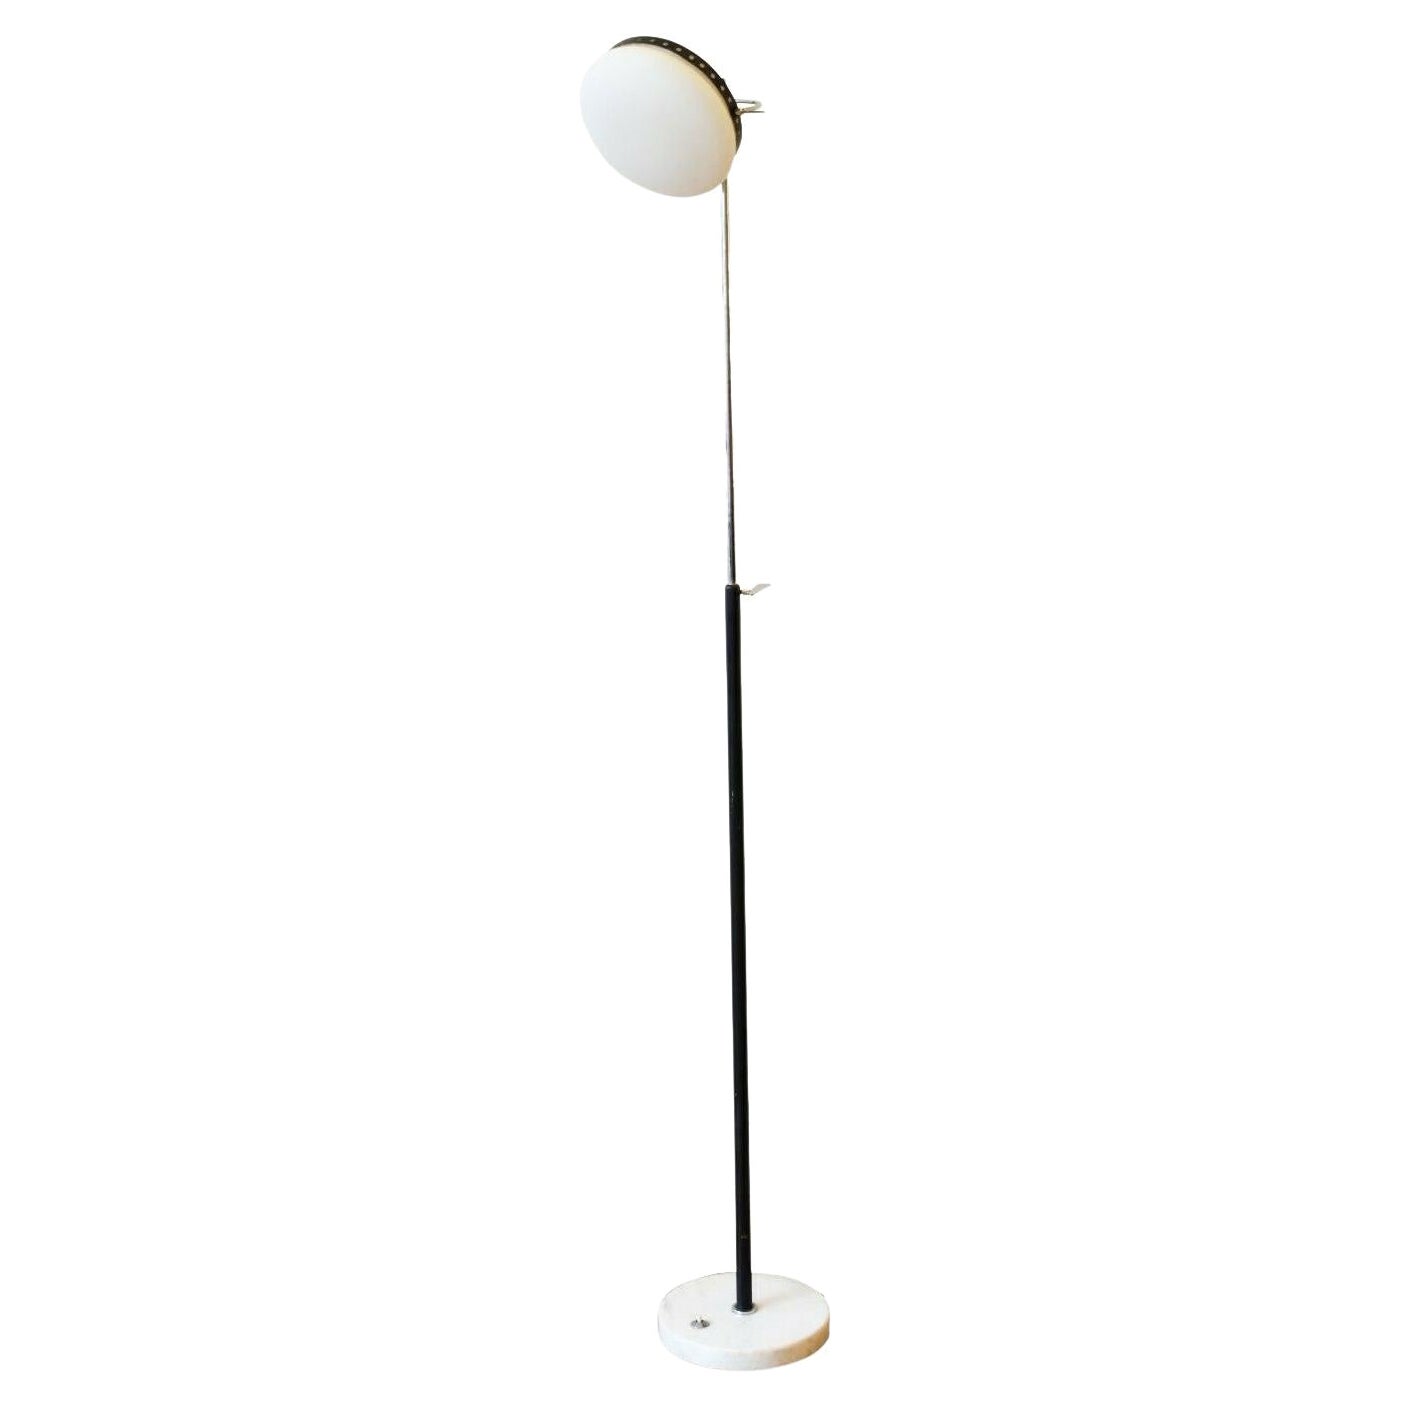 Italian 1950s Chrome Floor Lamp with Frosted Glass, Marble Base by Stillux